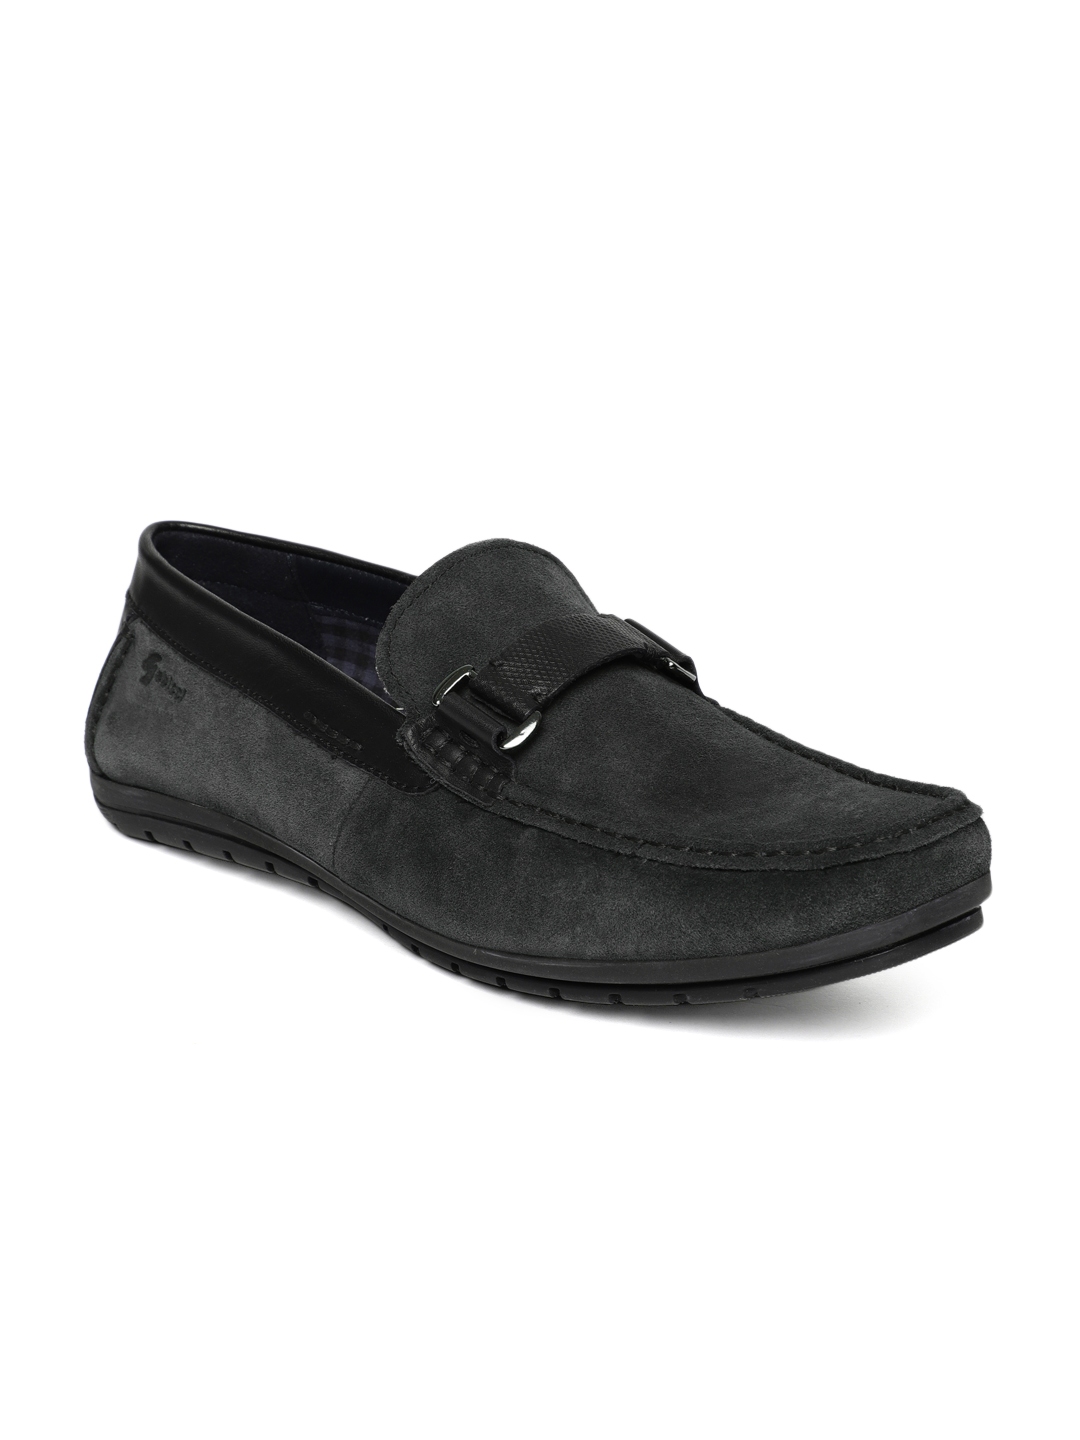 Buy GABICCI Men Black Suede Loafers - Casual Shoes for Men 8964609 | Myntra